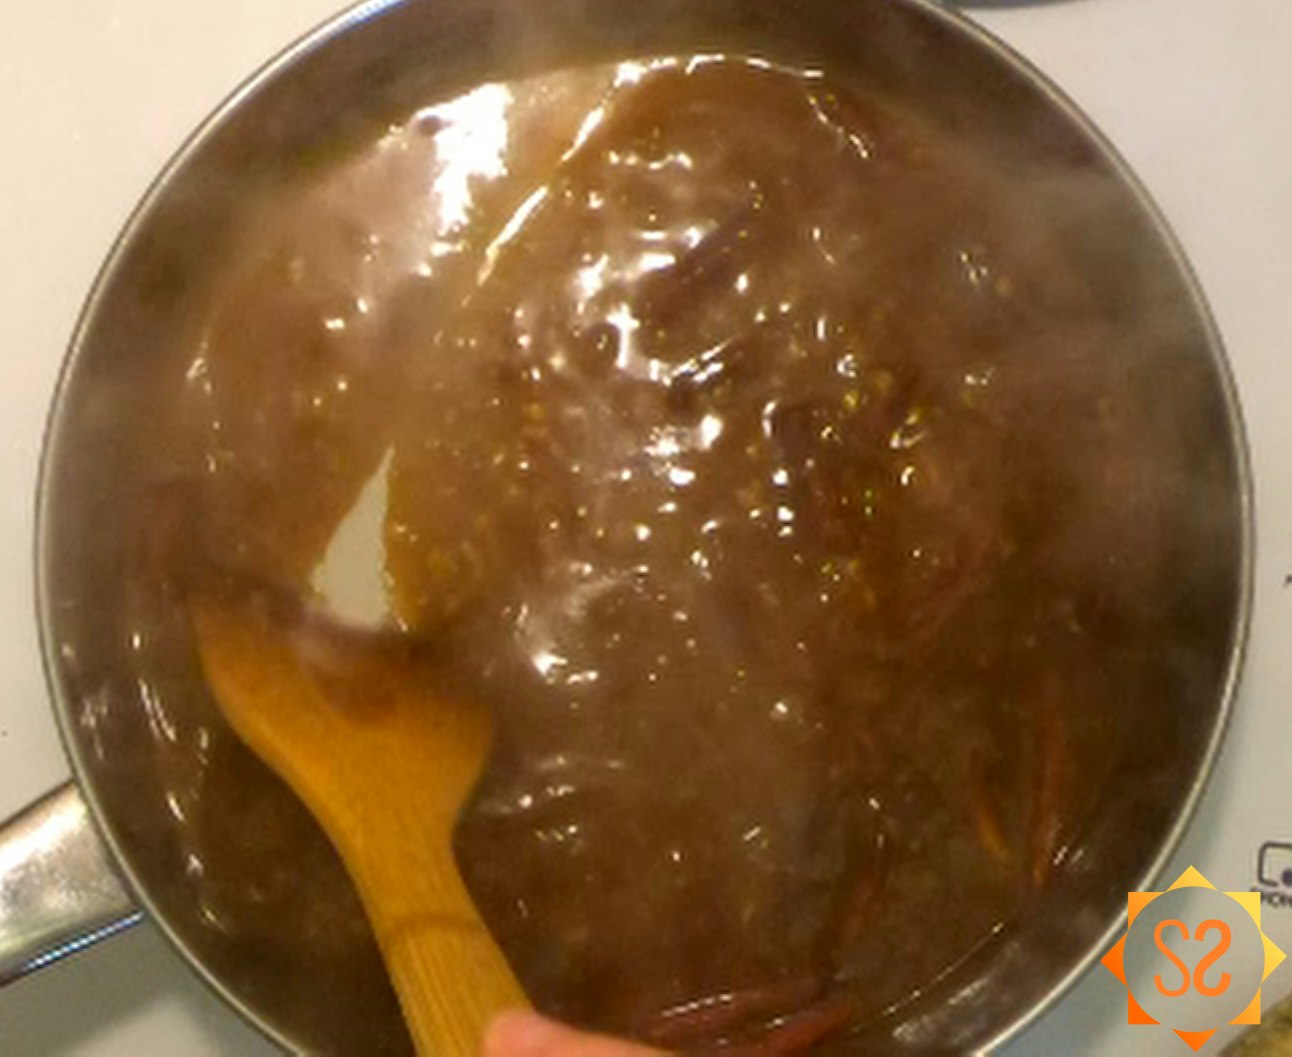 General Tso's sauce in a pan after it has thickened